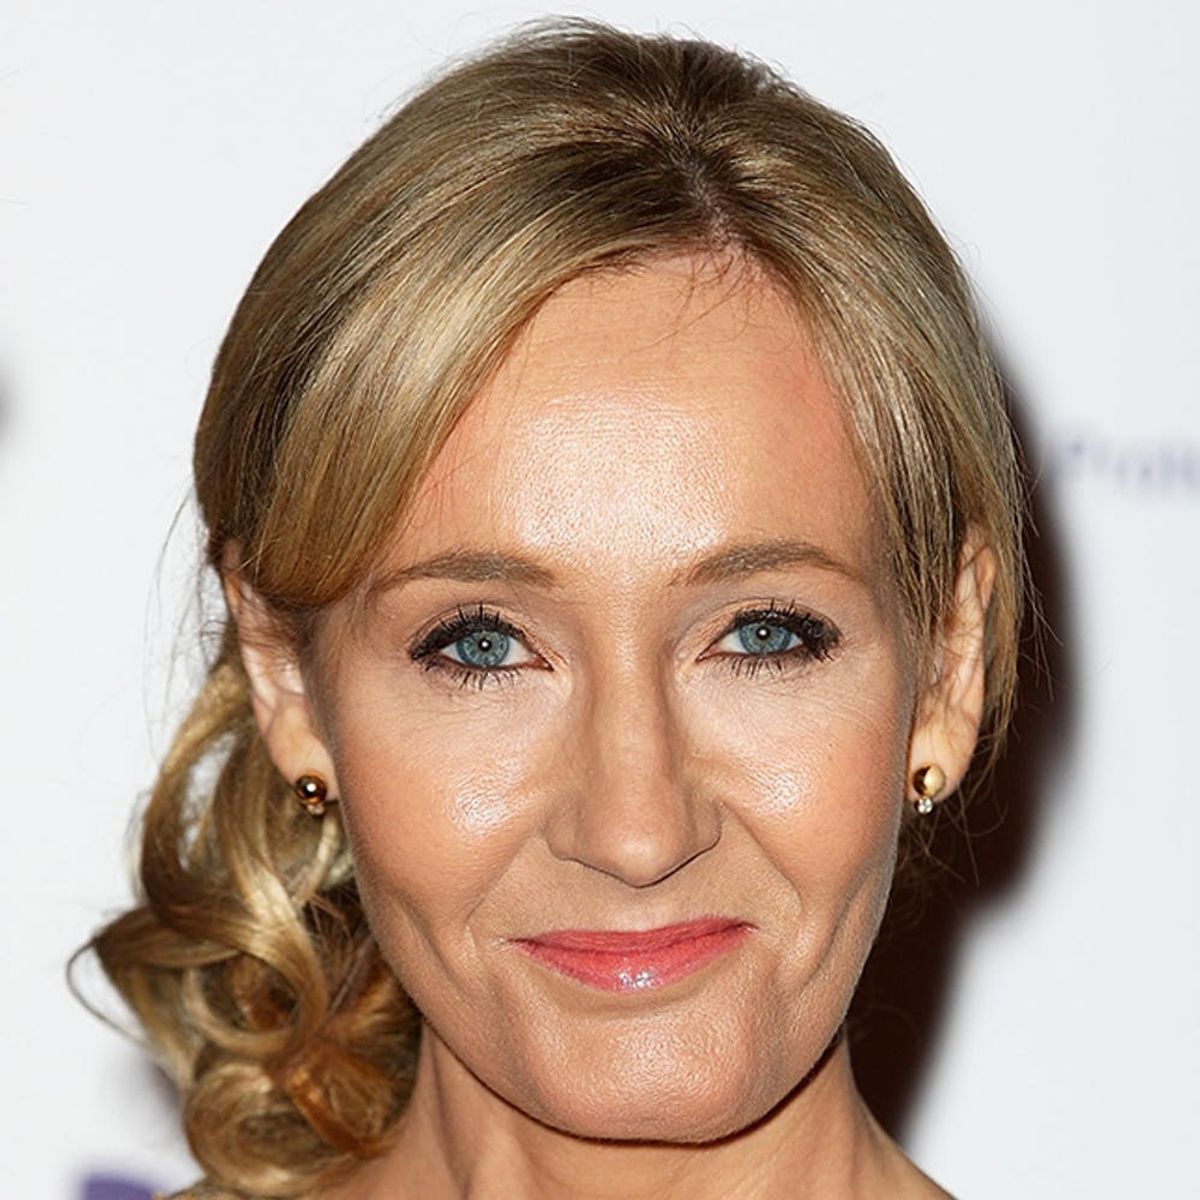 This Harry Potter News from J.K. Rowling Will Make You Feel Old